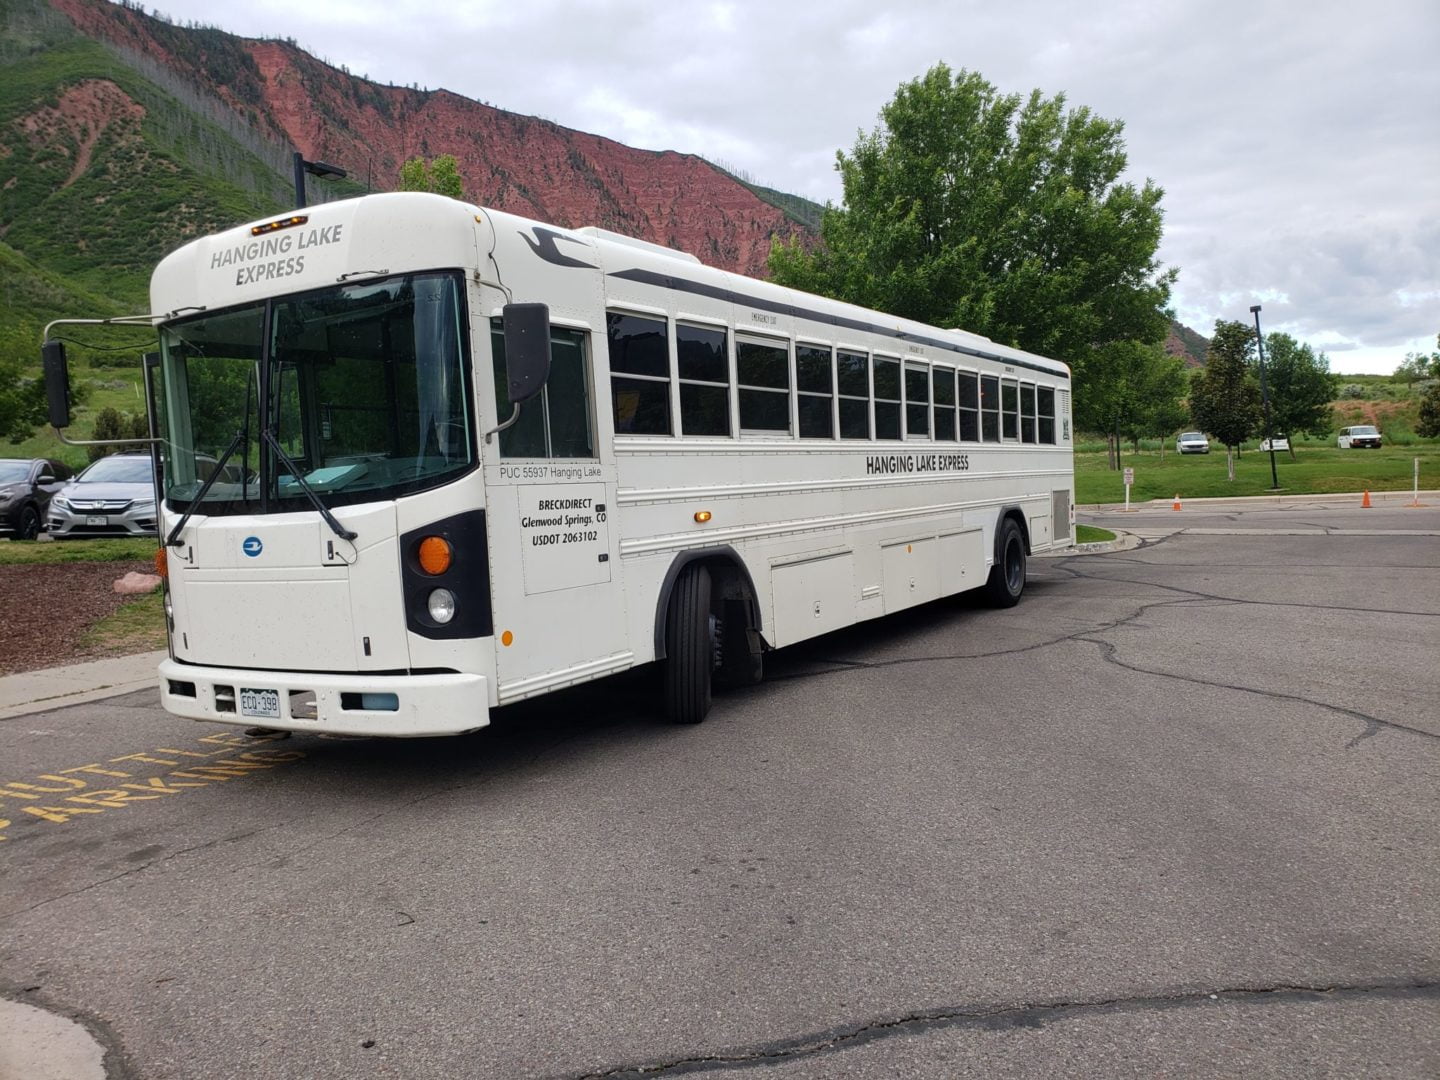 A 20 minute shuttle ride to Hanging Lake from the Rec. Center